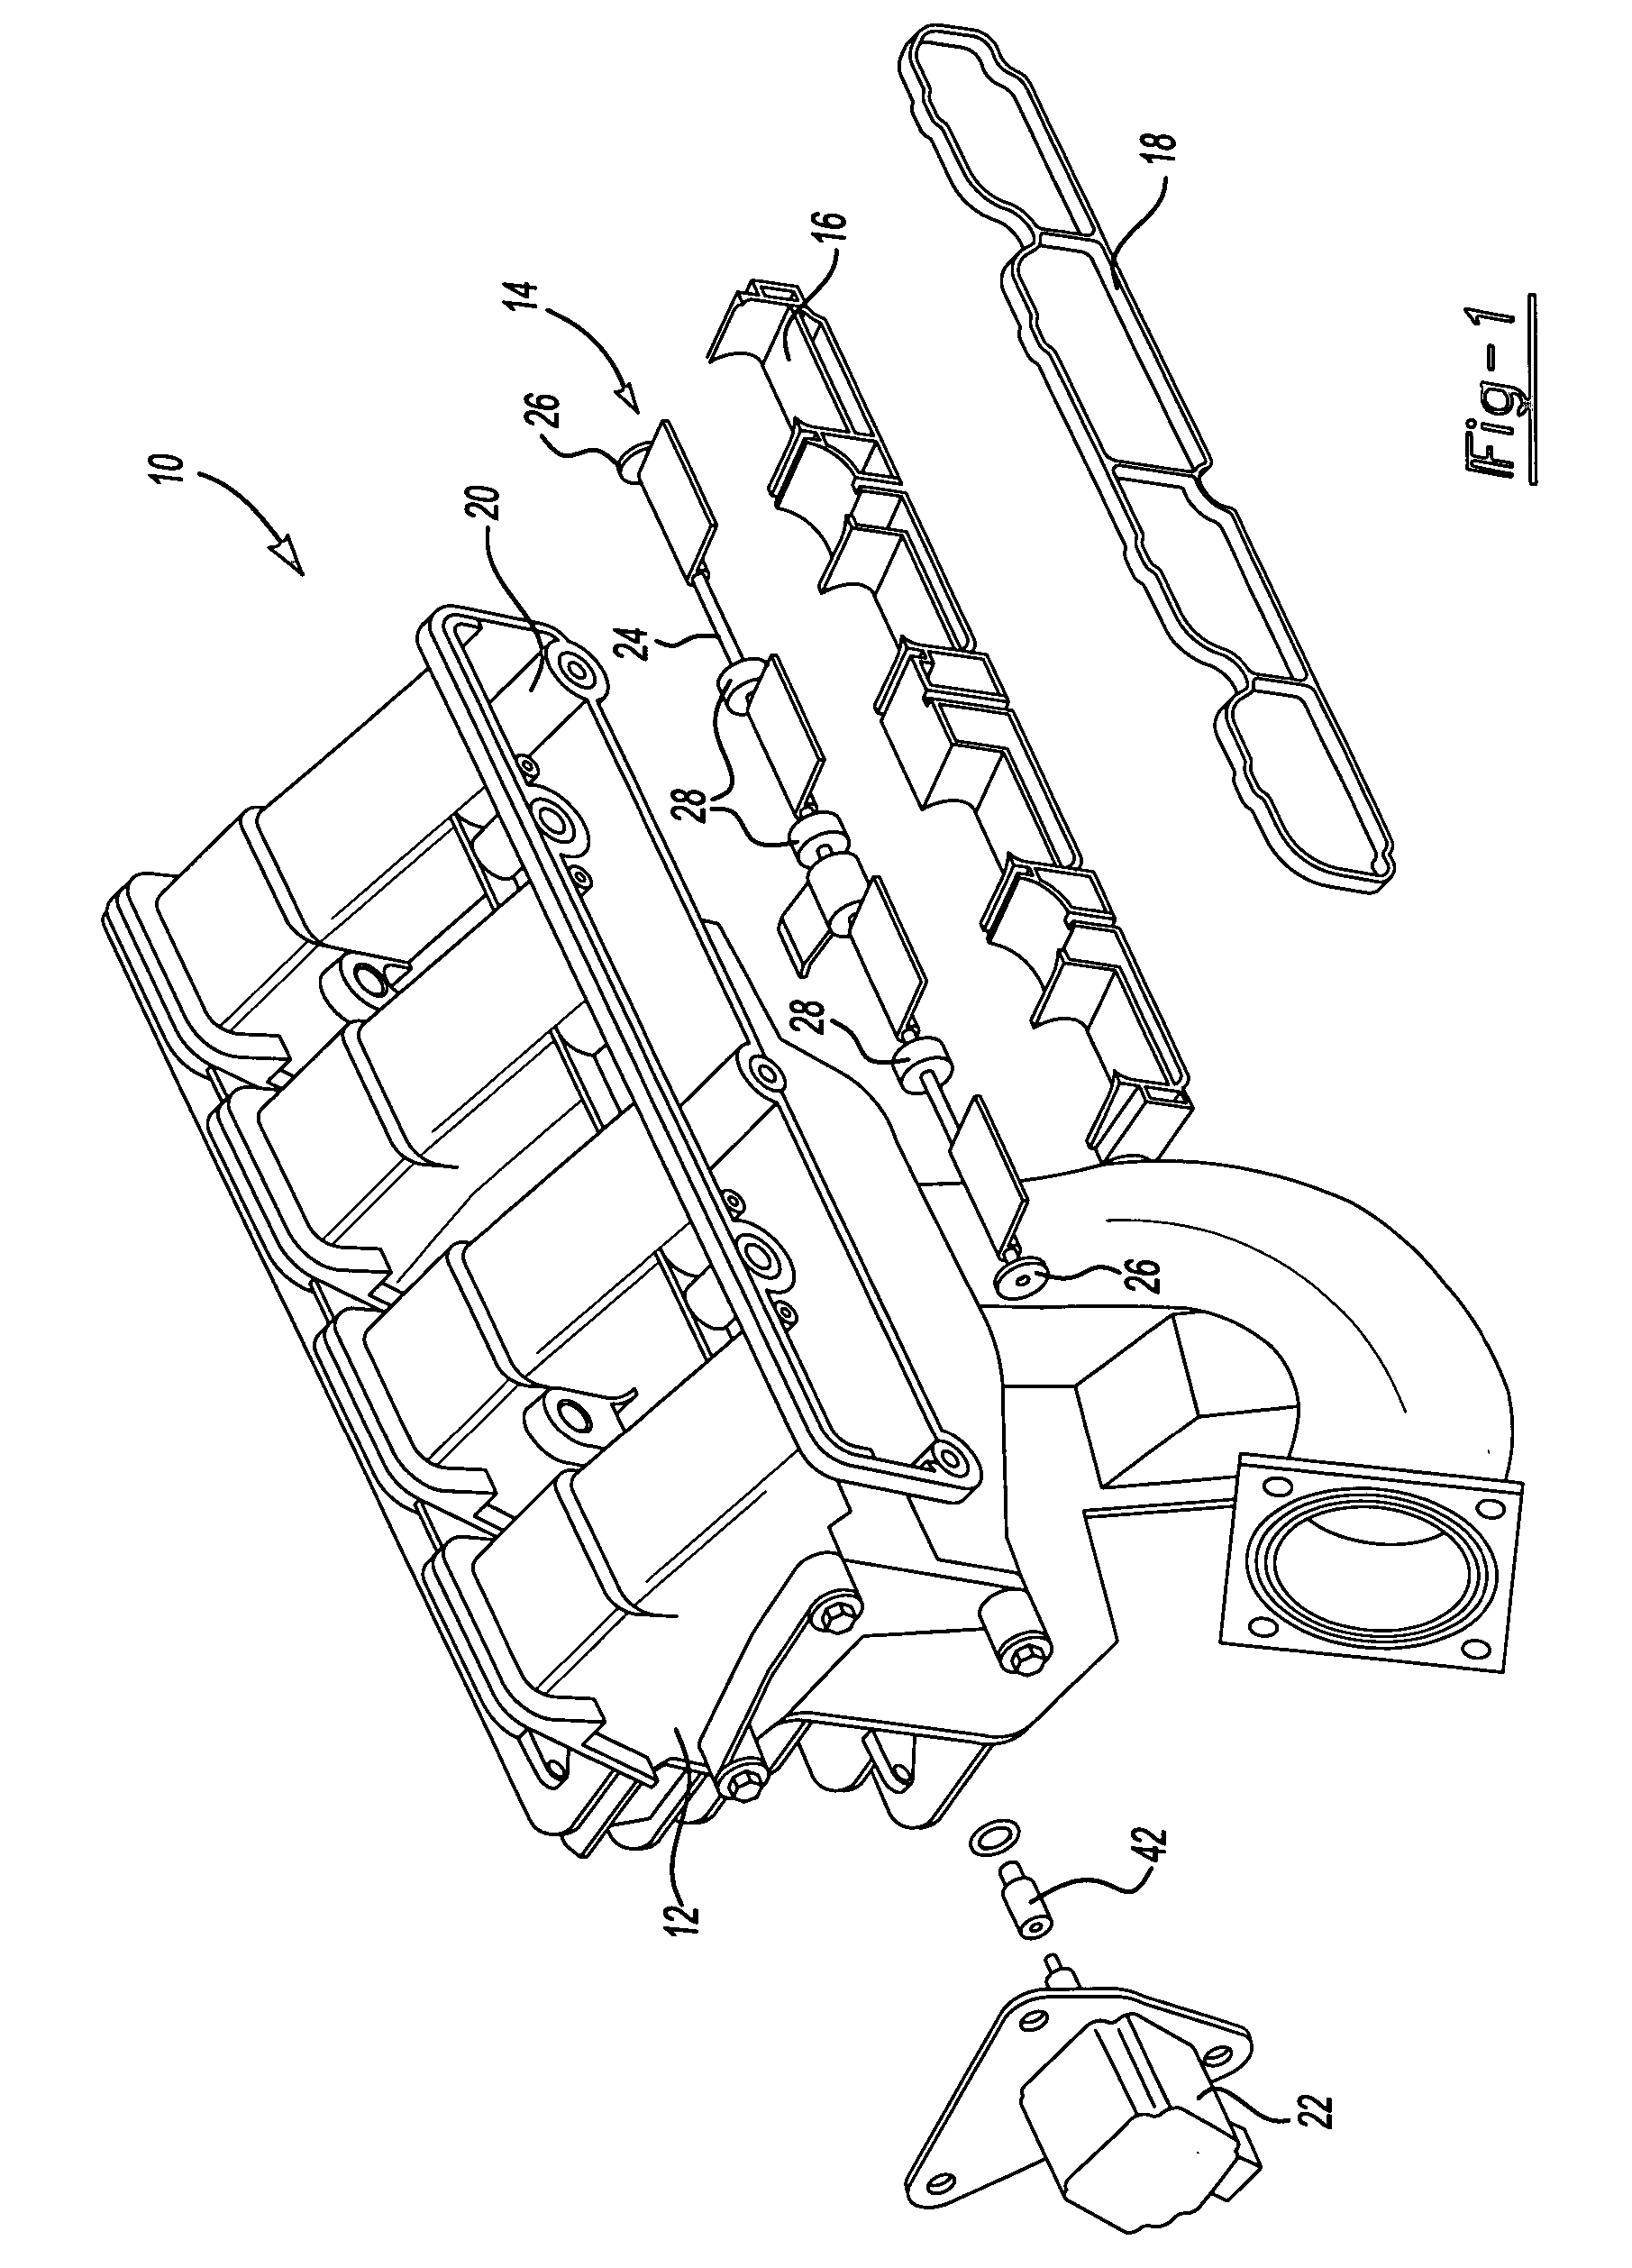 Intake manifold with low chatter shaft system